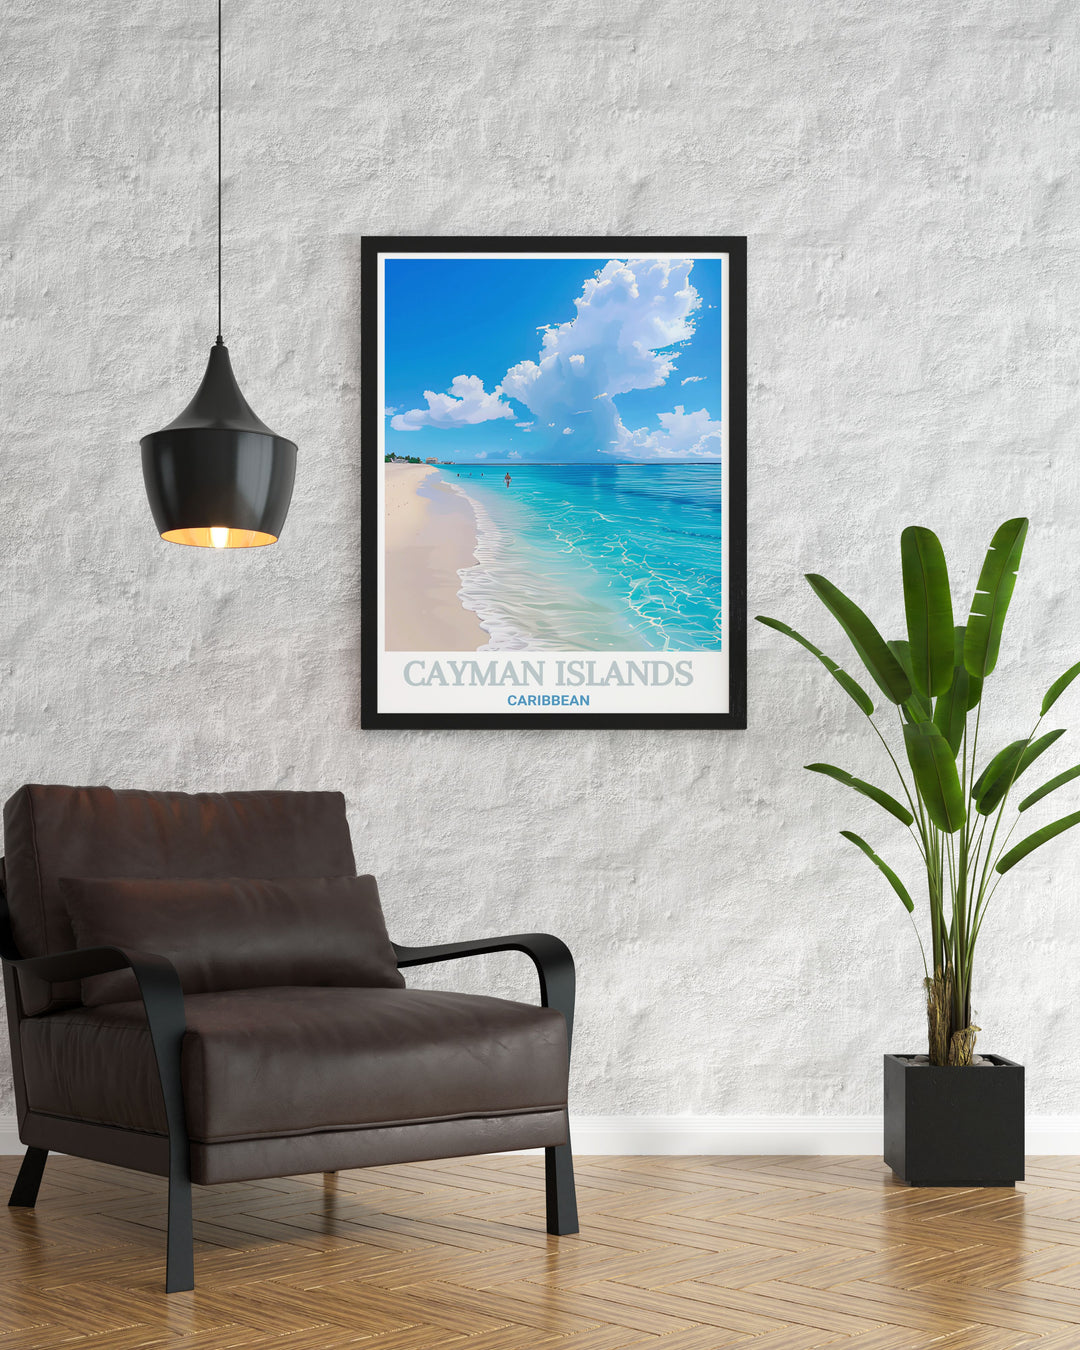 Stunning Seven Mile Beach prints showcasing the natural beauty of the Cayman Islands available as a modern art piece or framed print perfect for those who appreciate sophisticated travel posters and unique wall art